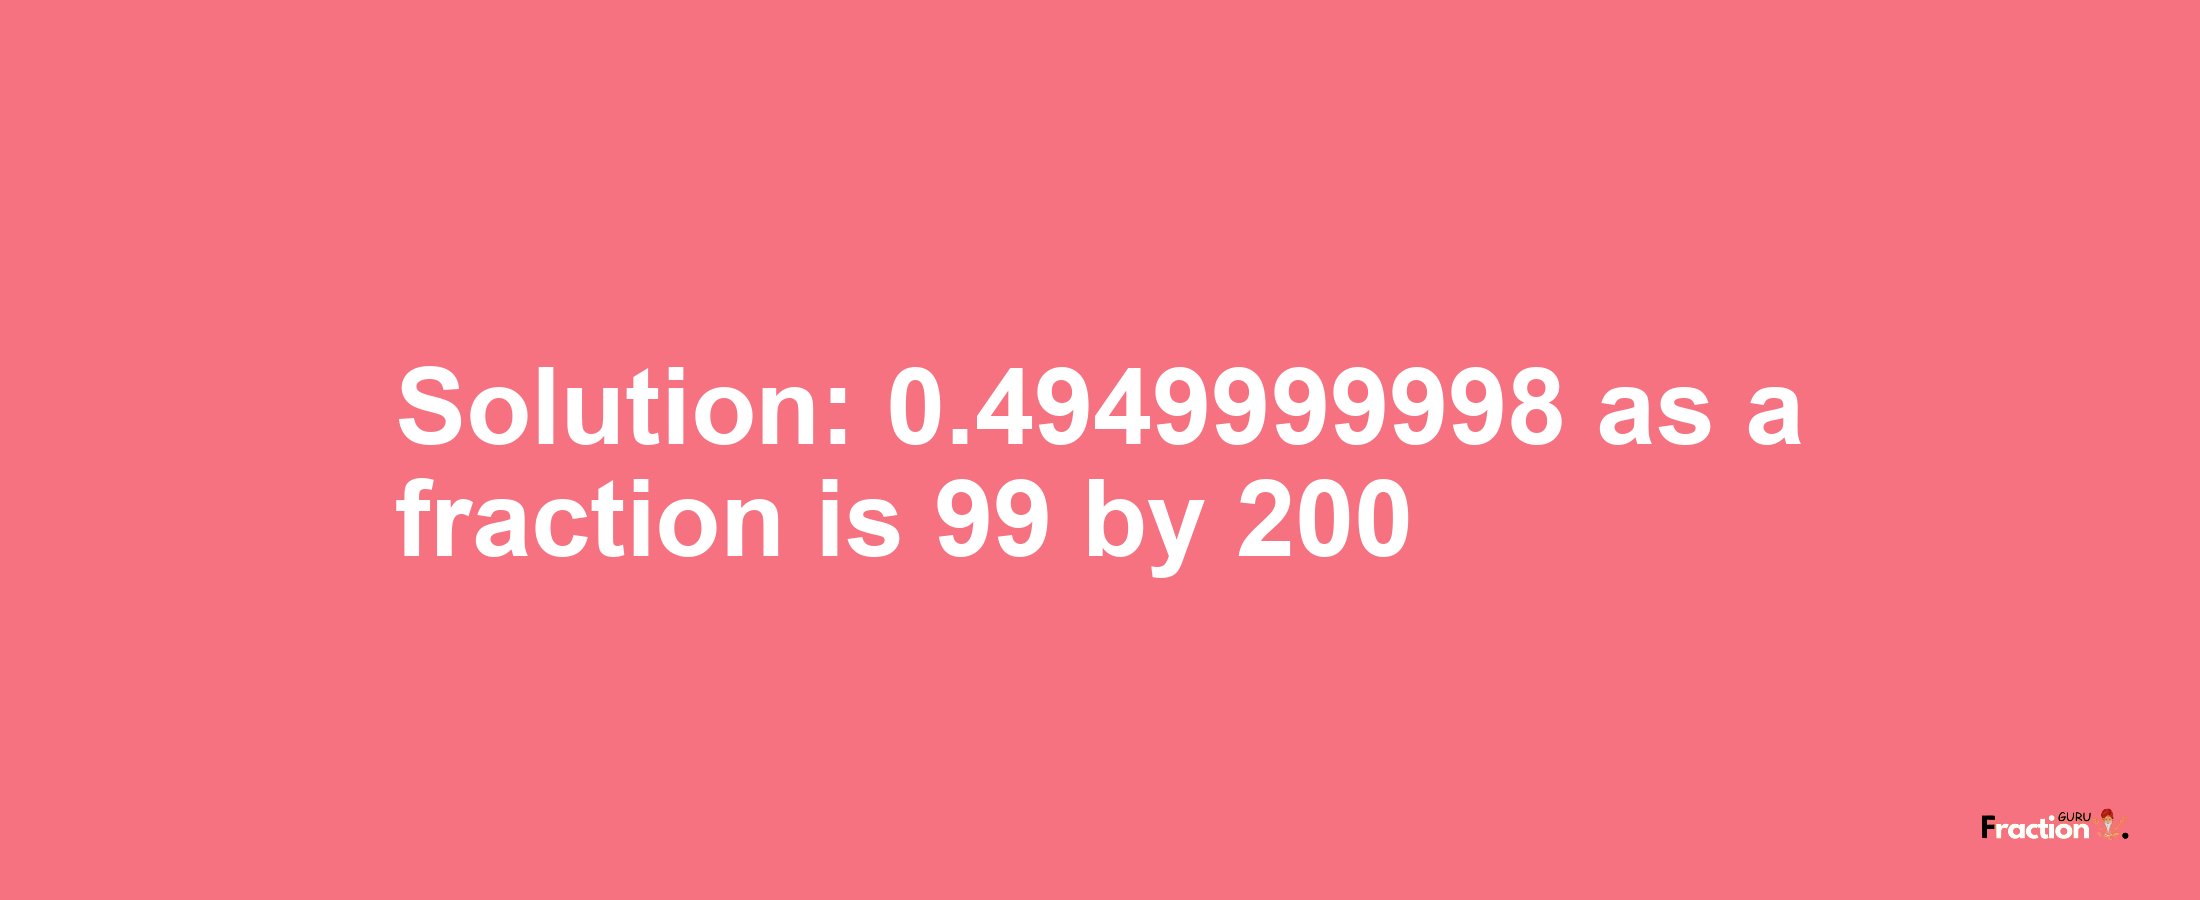 Solution:0.4949999998 as a fraction is 99/200